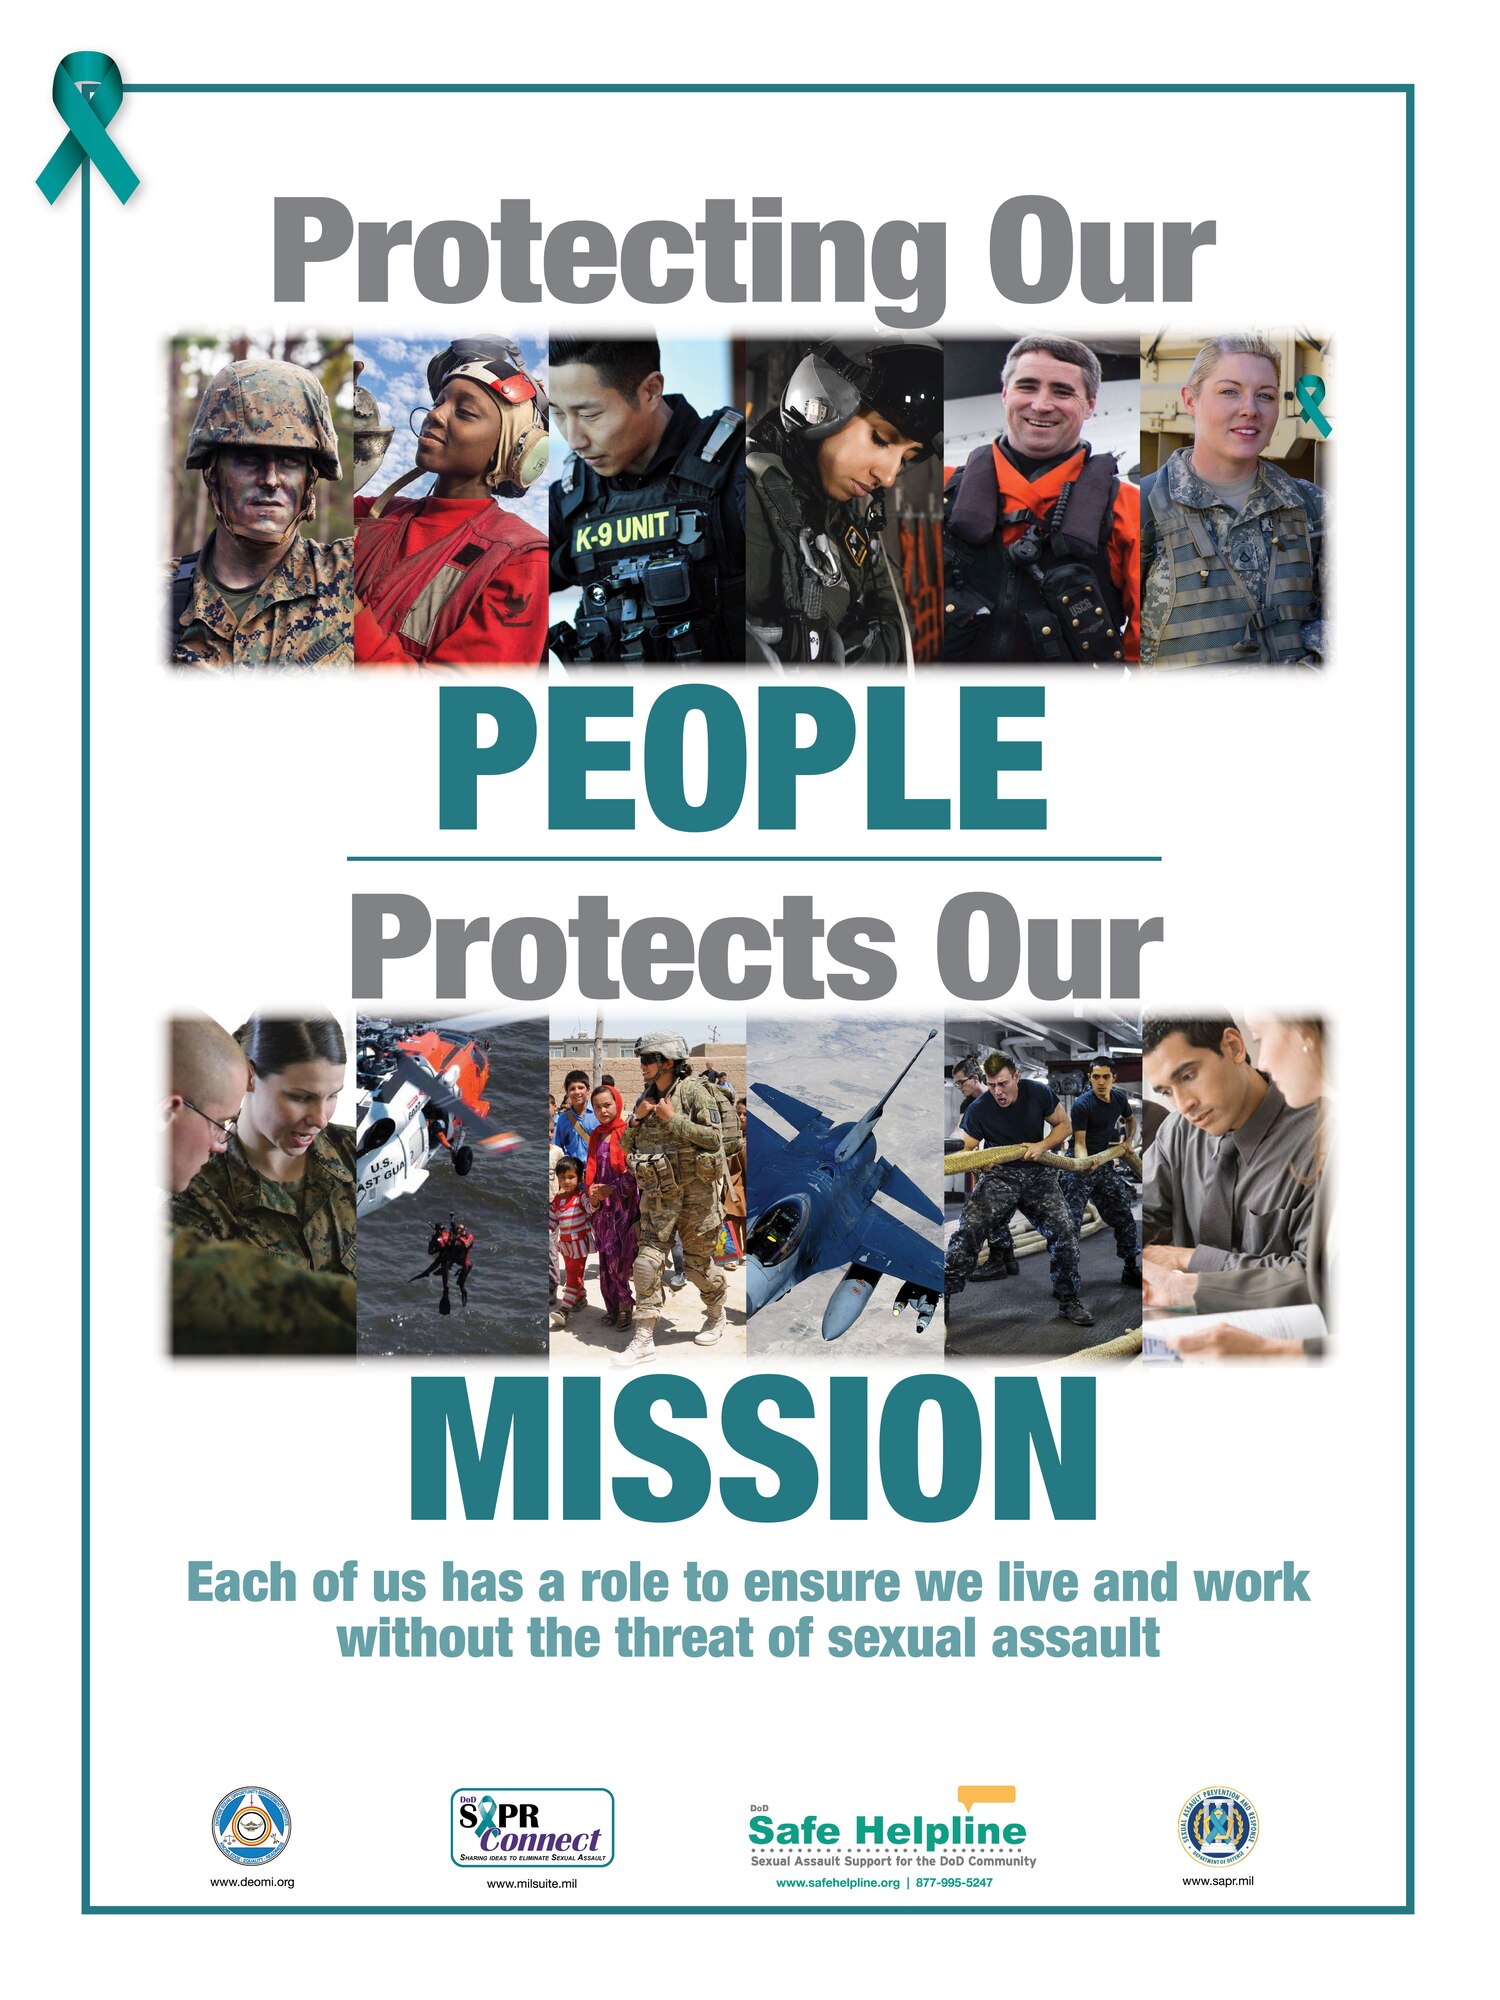 Message from the U.S. Department of Defense
Sexual Assault Prevention and Response